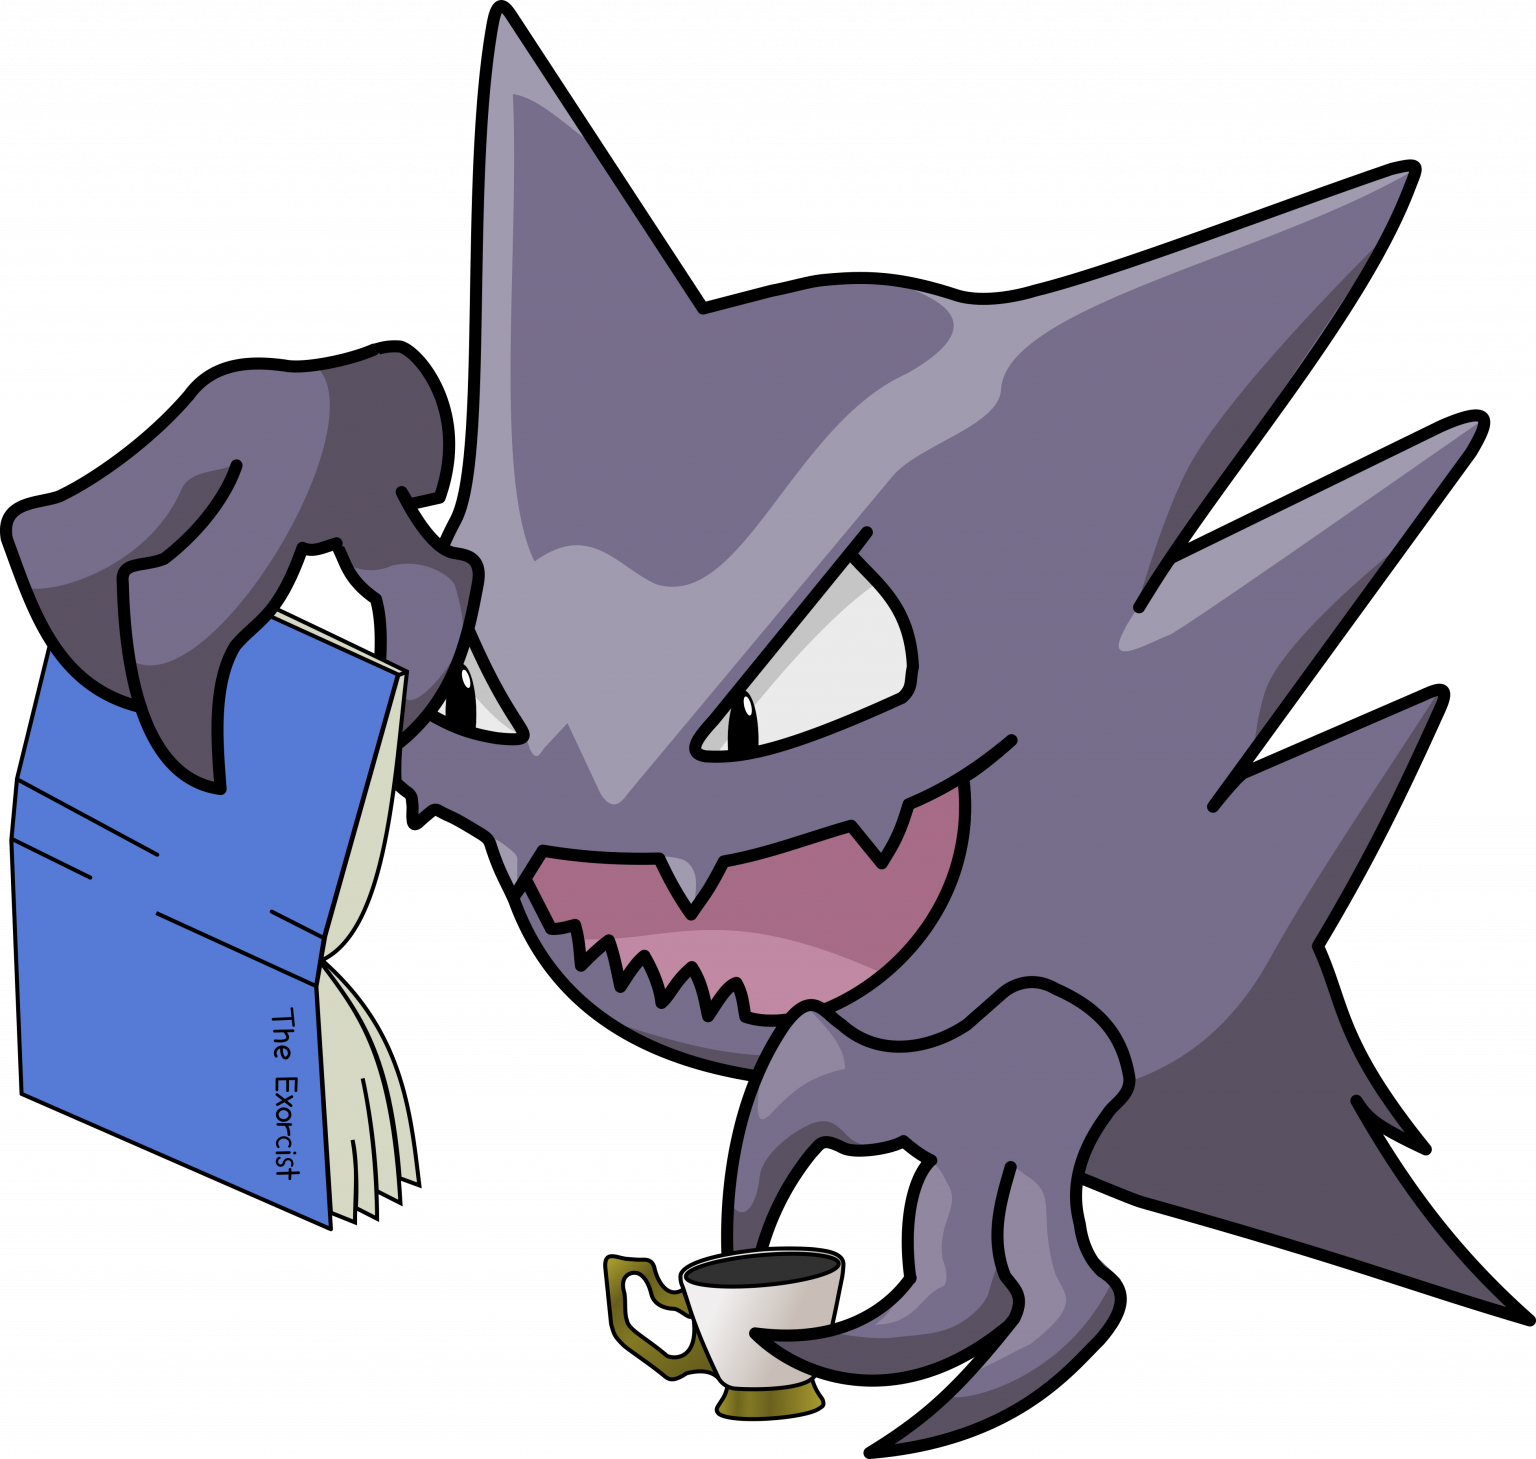 Haunter-Pokemon-PNG-Background.png - 4k Wallpapers